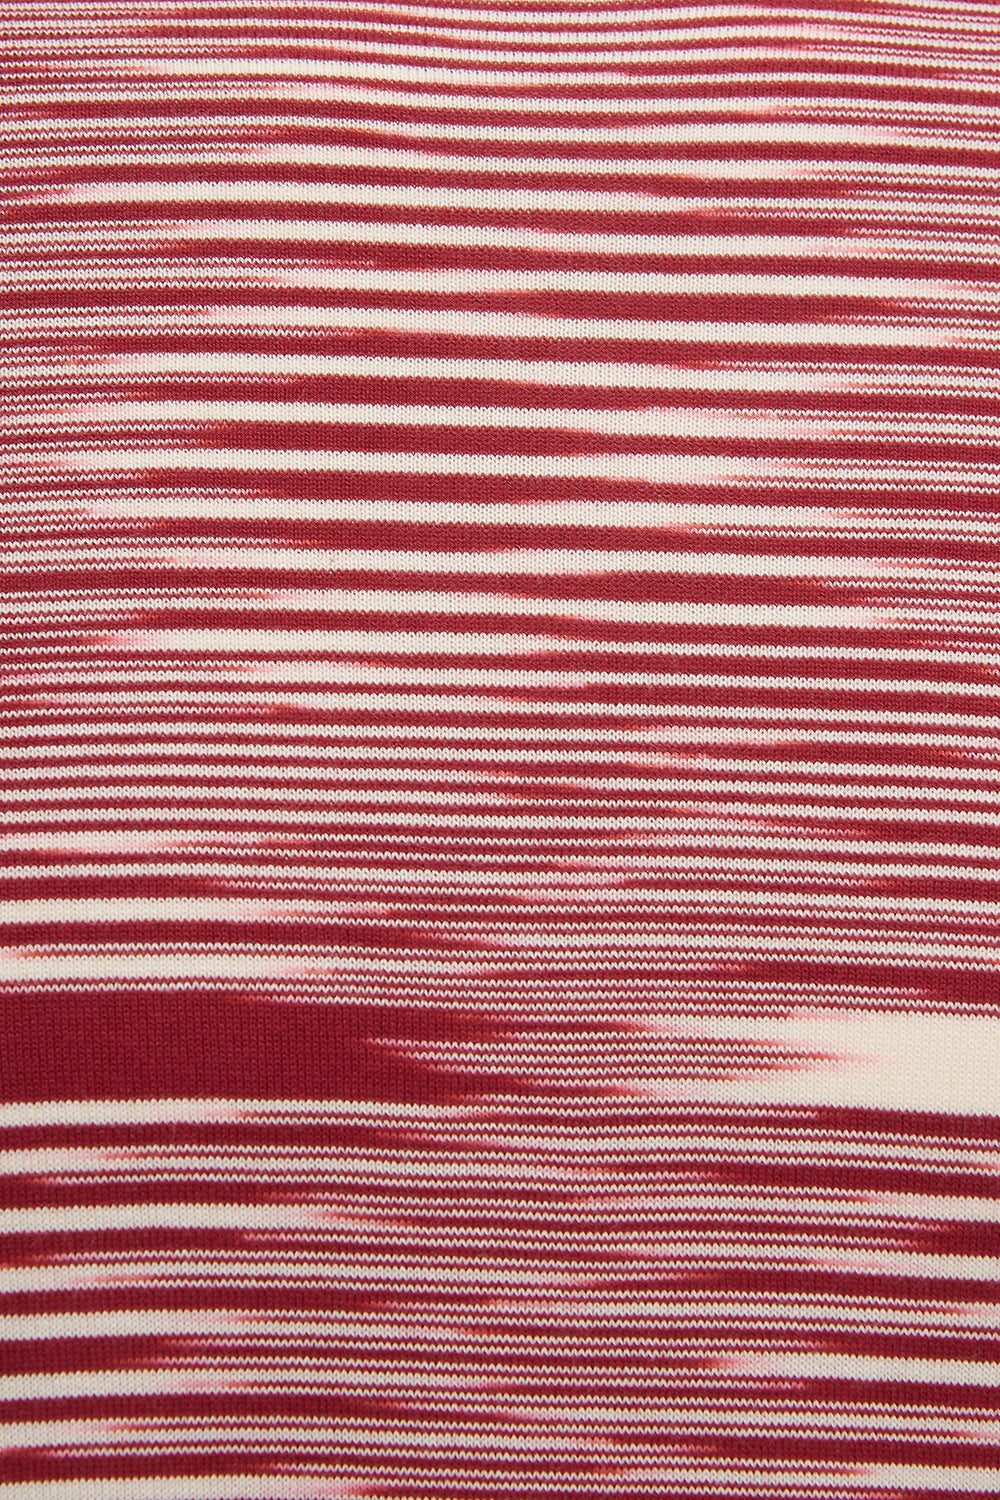 Missoni Men’s Space-dyed Stripe Top Red - Close Up Pattern